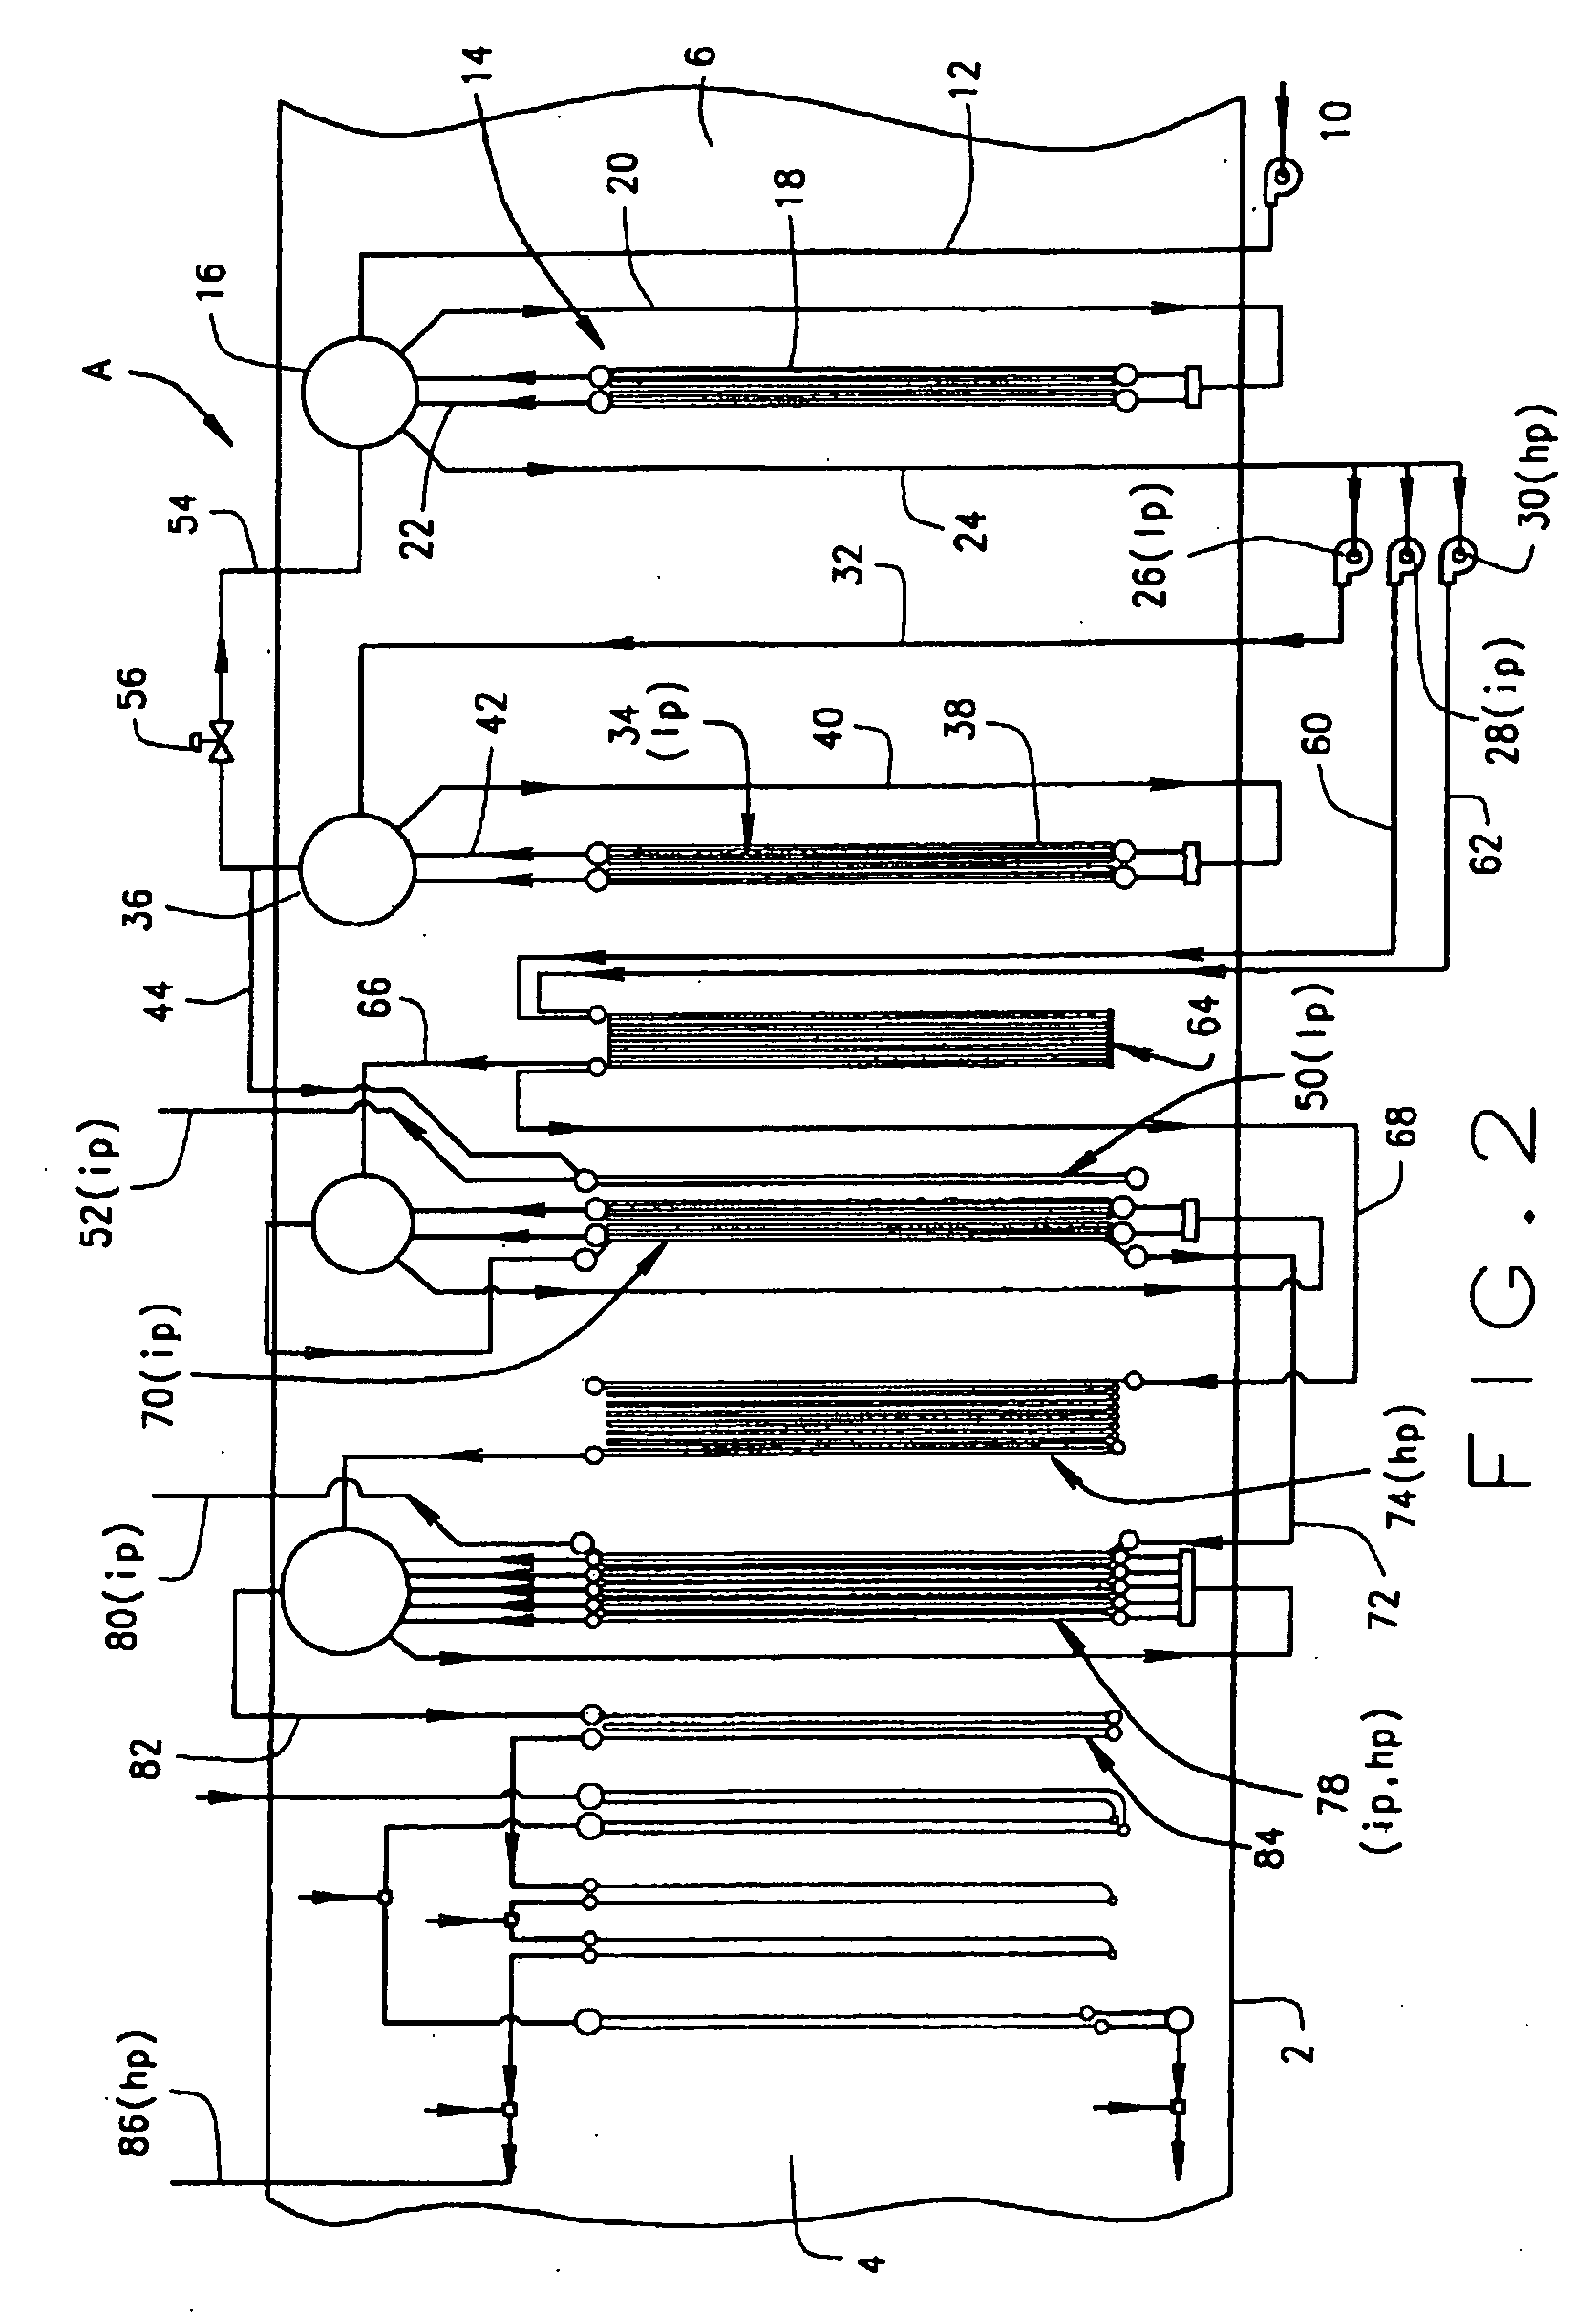 Process and apparatus for heating feedwater in a heat recovery steam generator